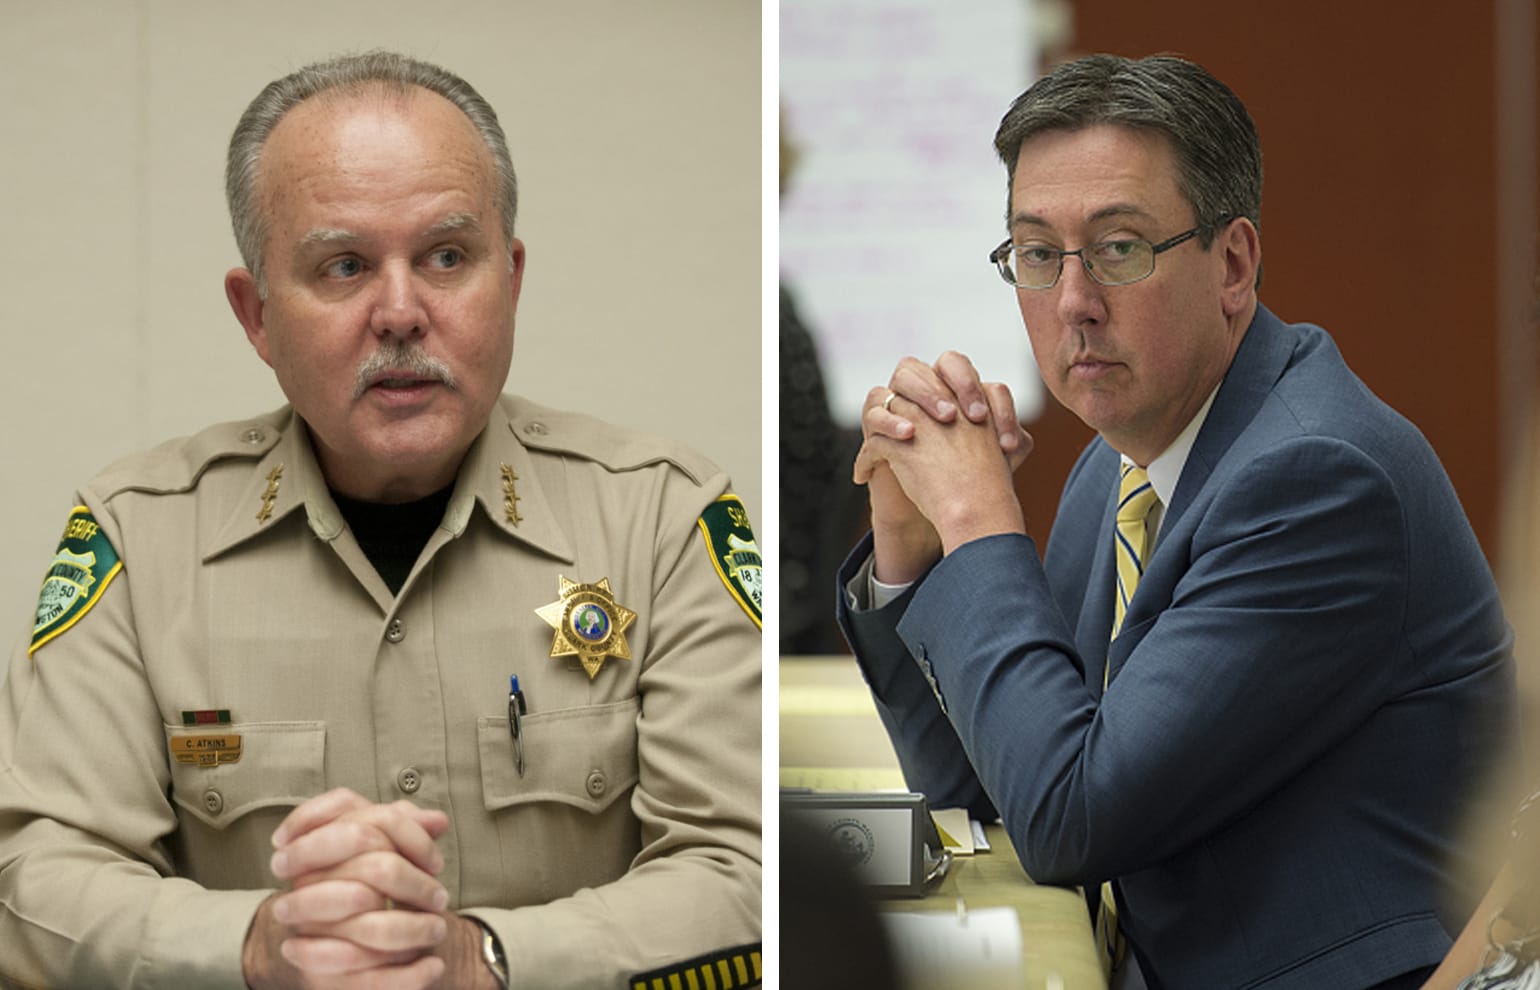 Clark County Sheriff Chuck Atkins, left, and Prosecuting Attorney Tony Golik released a joint statement Wednesday regarding bigotry and hate in the community.